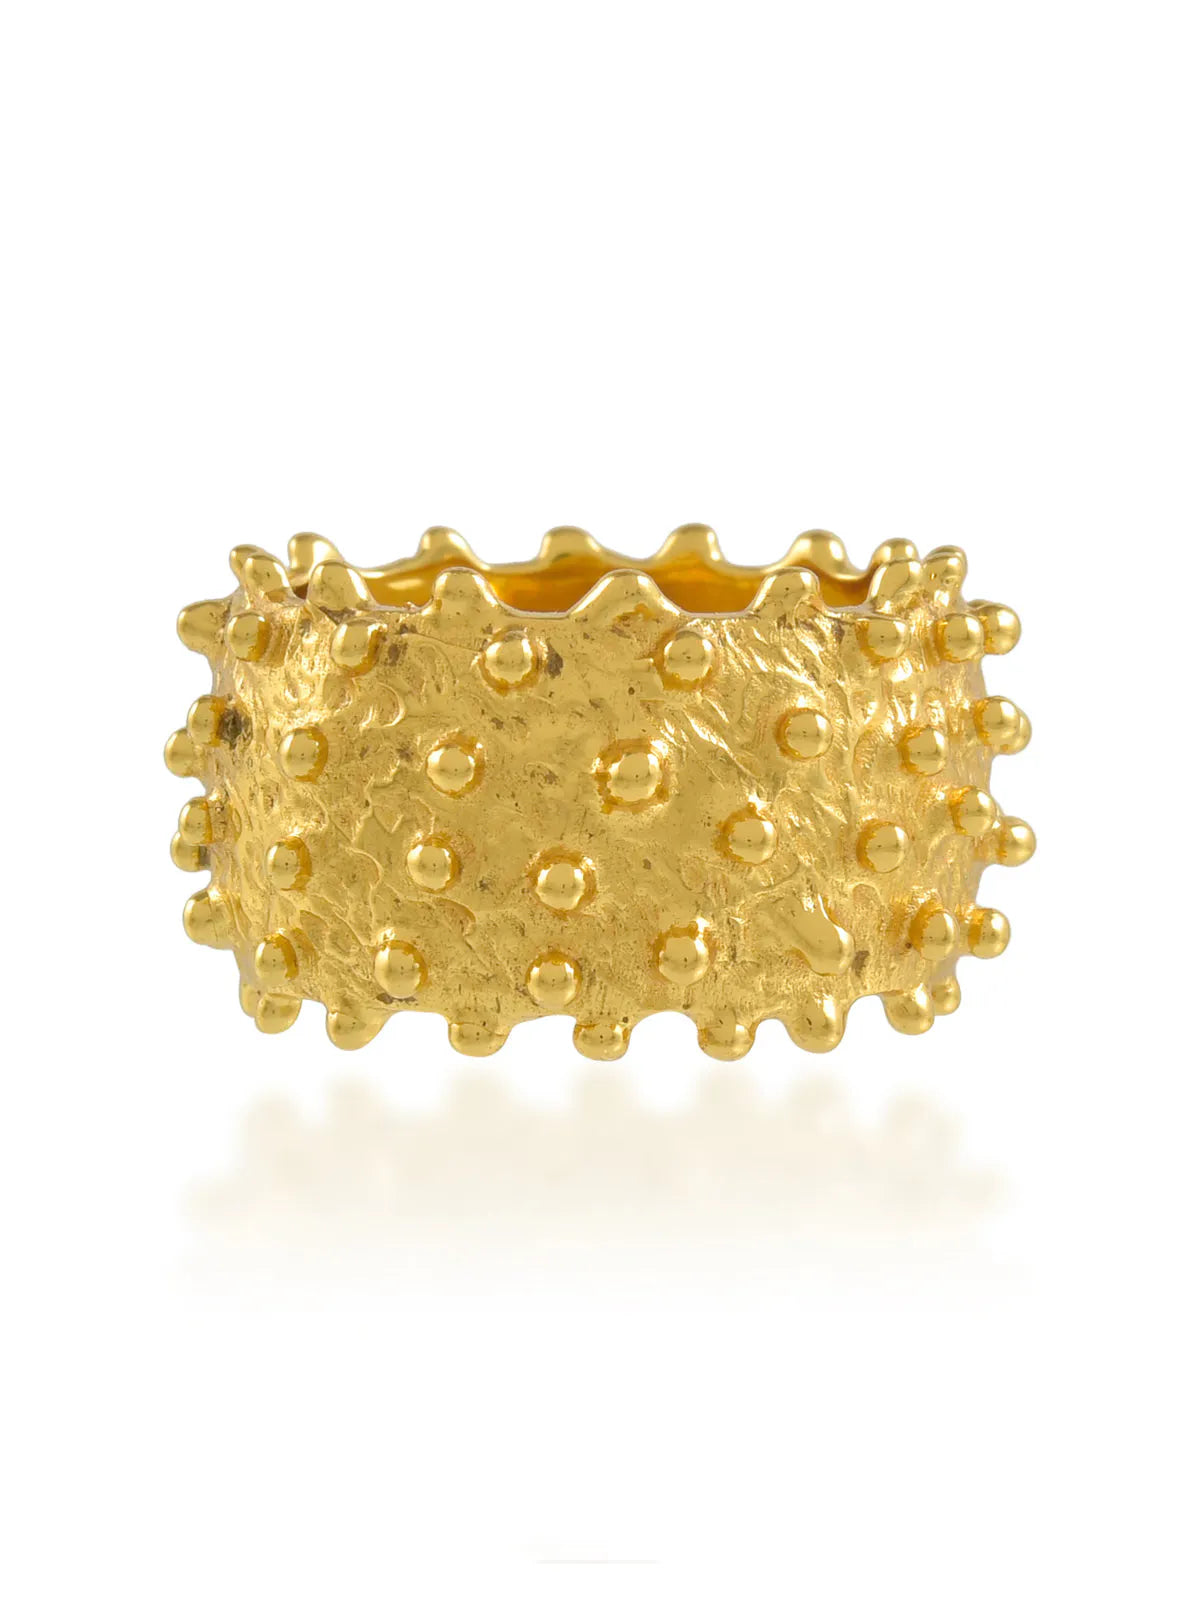 A Shyla - Ilina Ring - Gold plated ring with spikes on it.